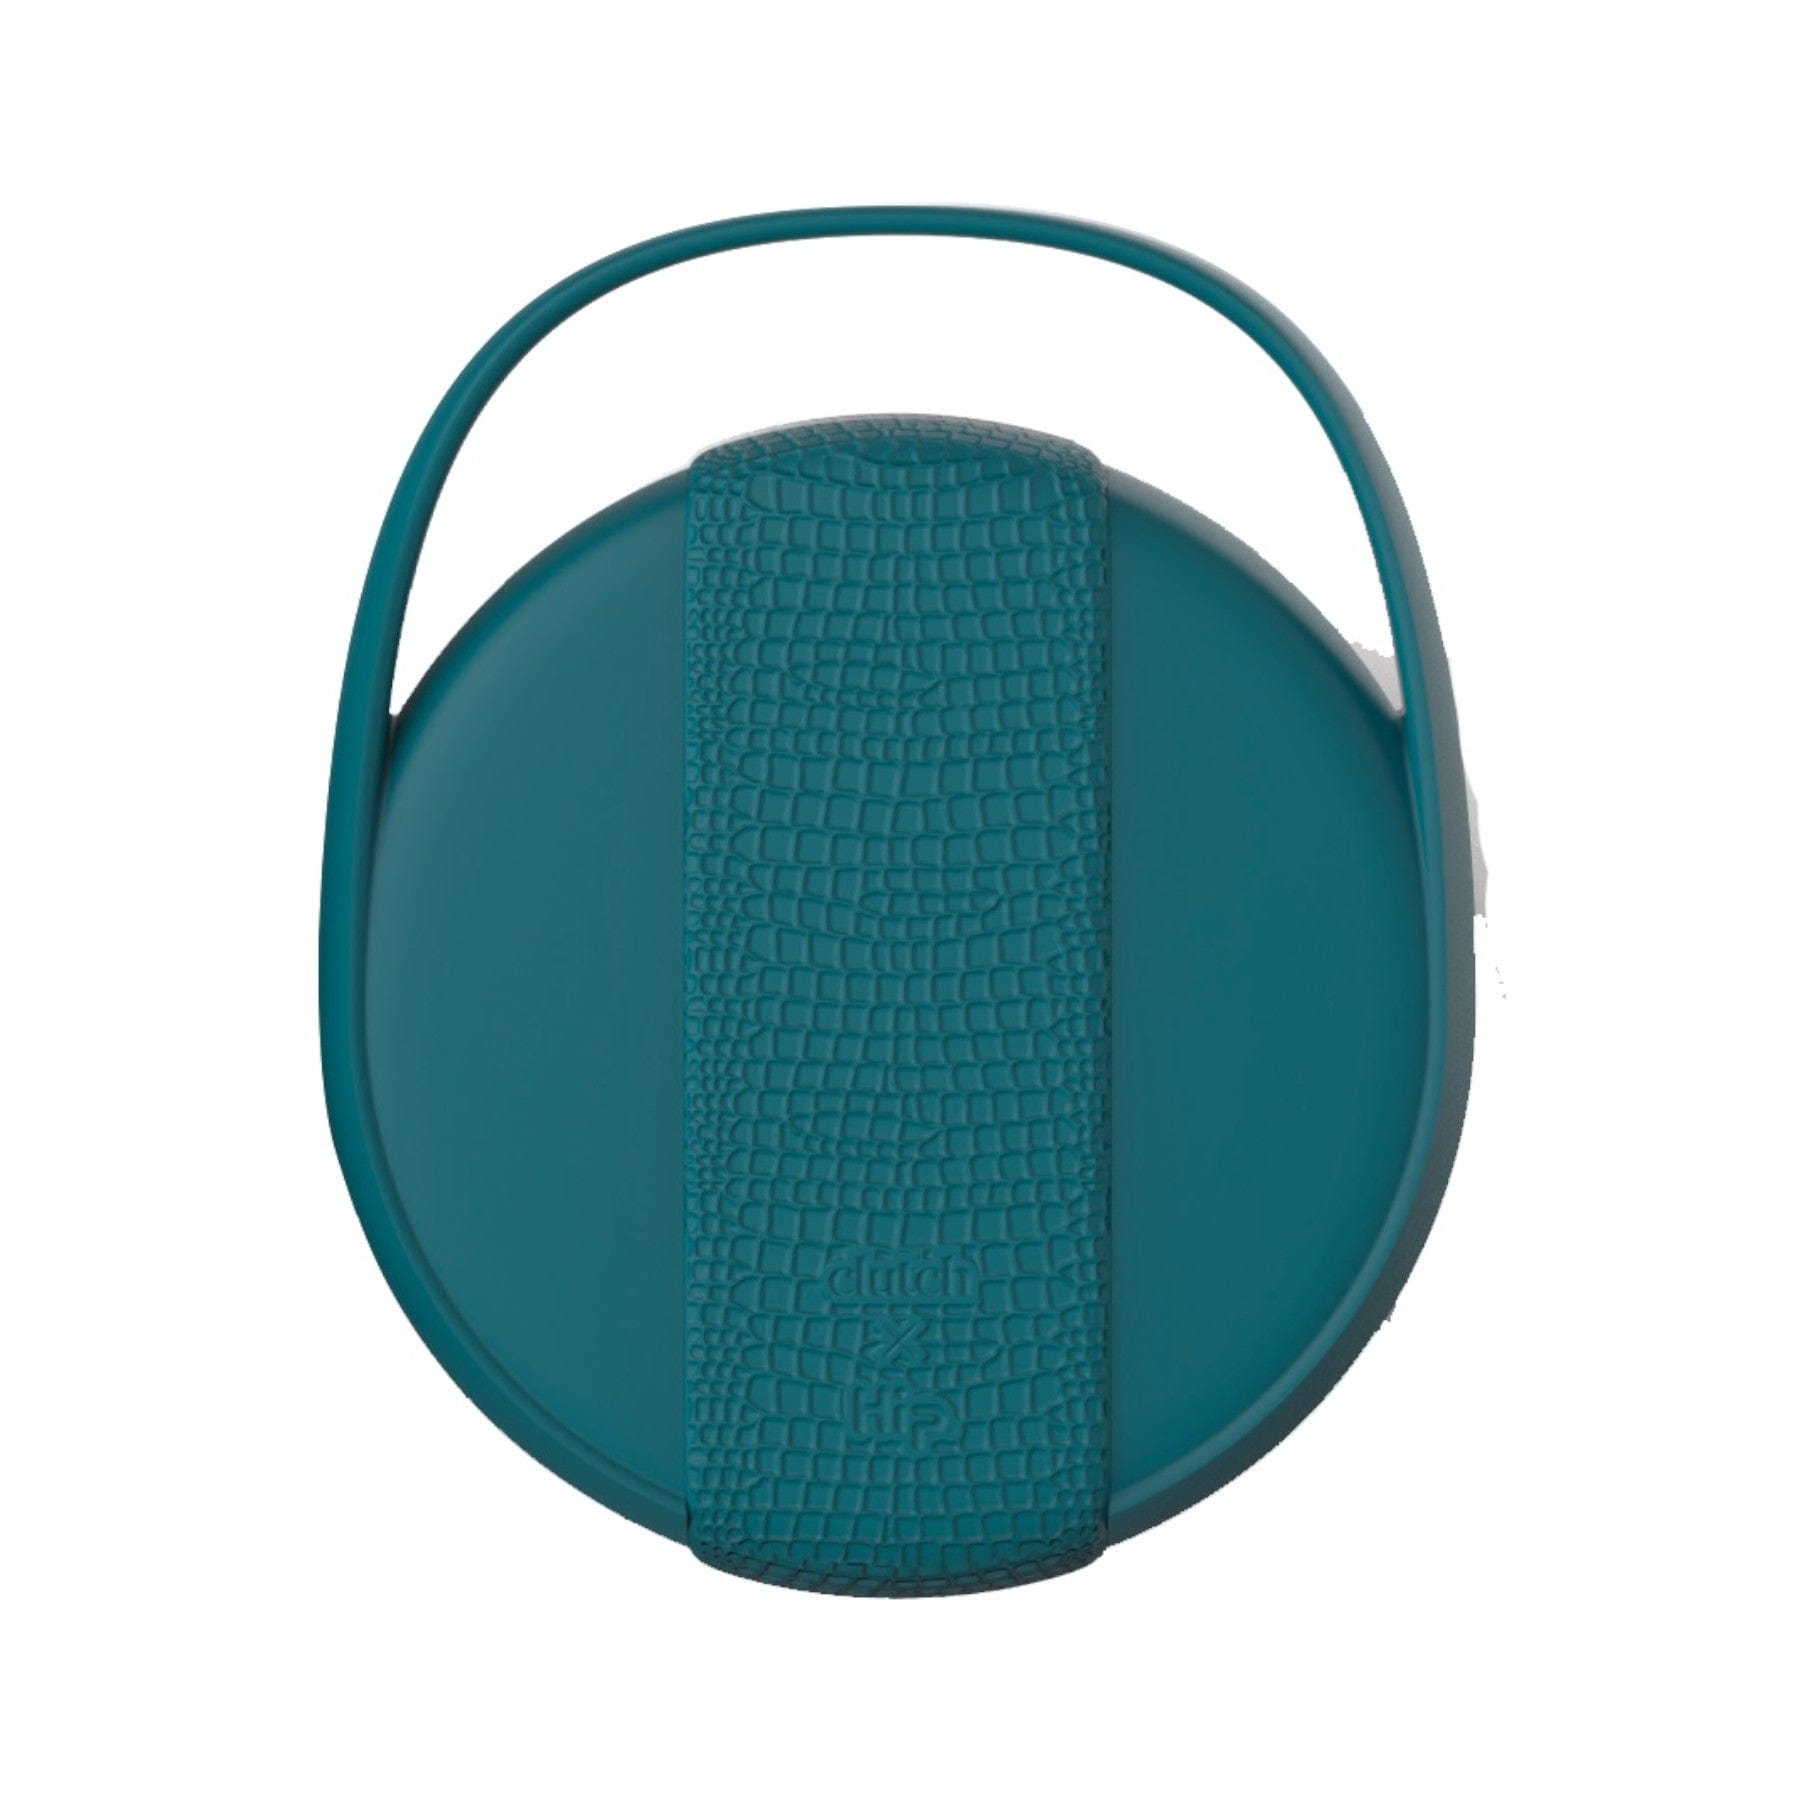 Teal portable Bluetooth speaker with textured design and carrying handle